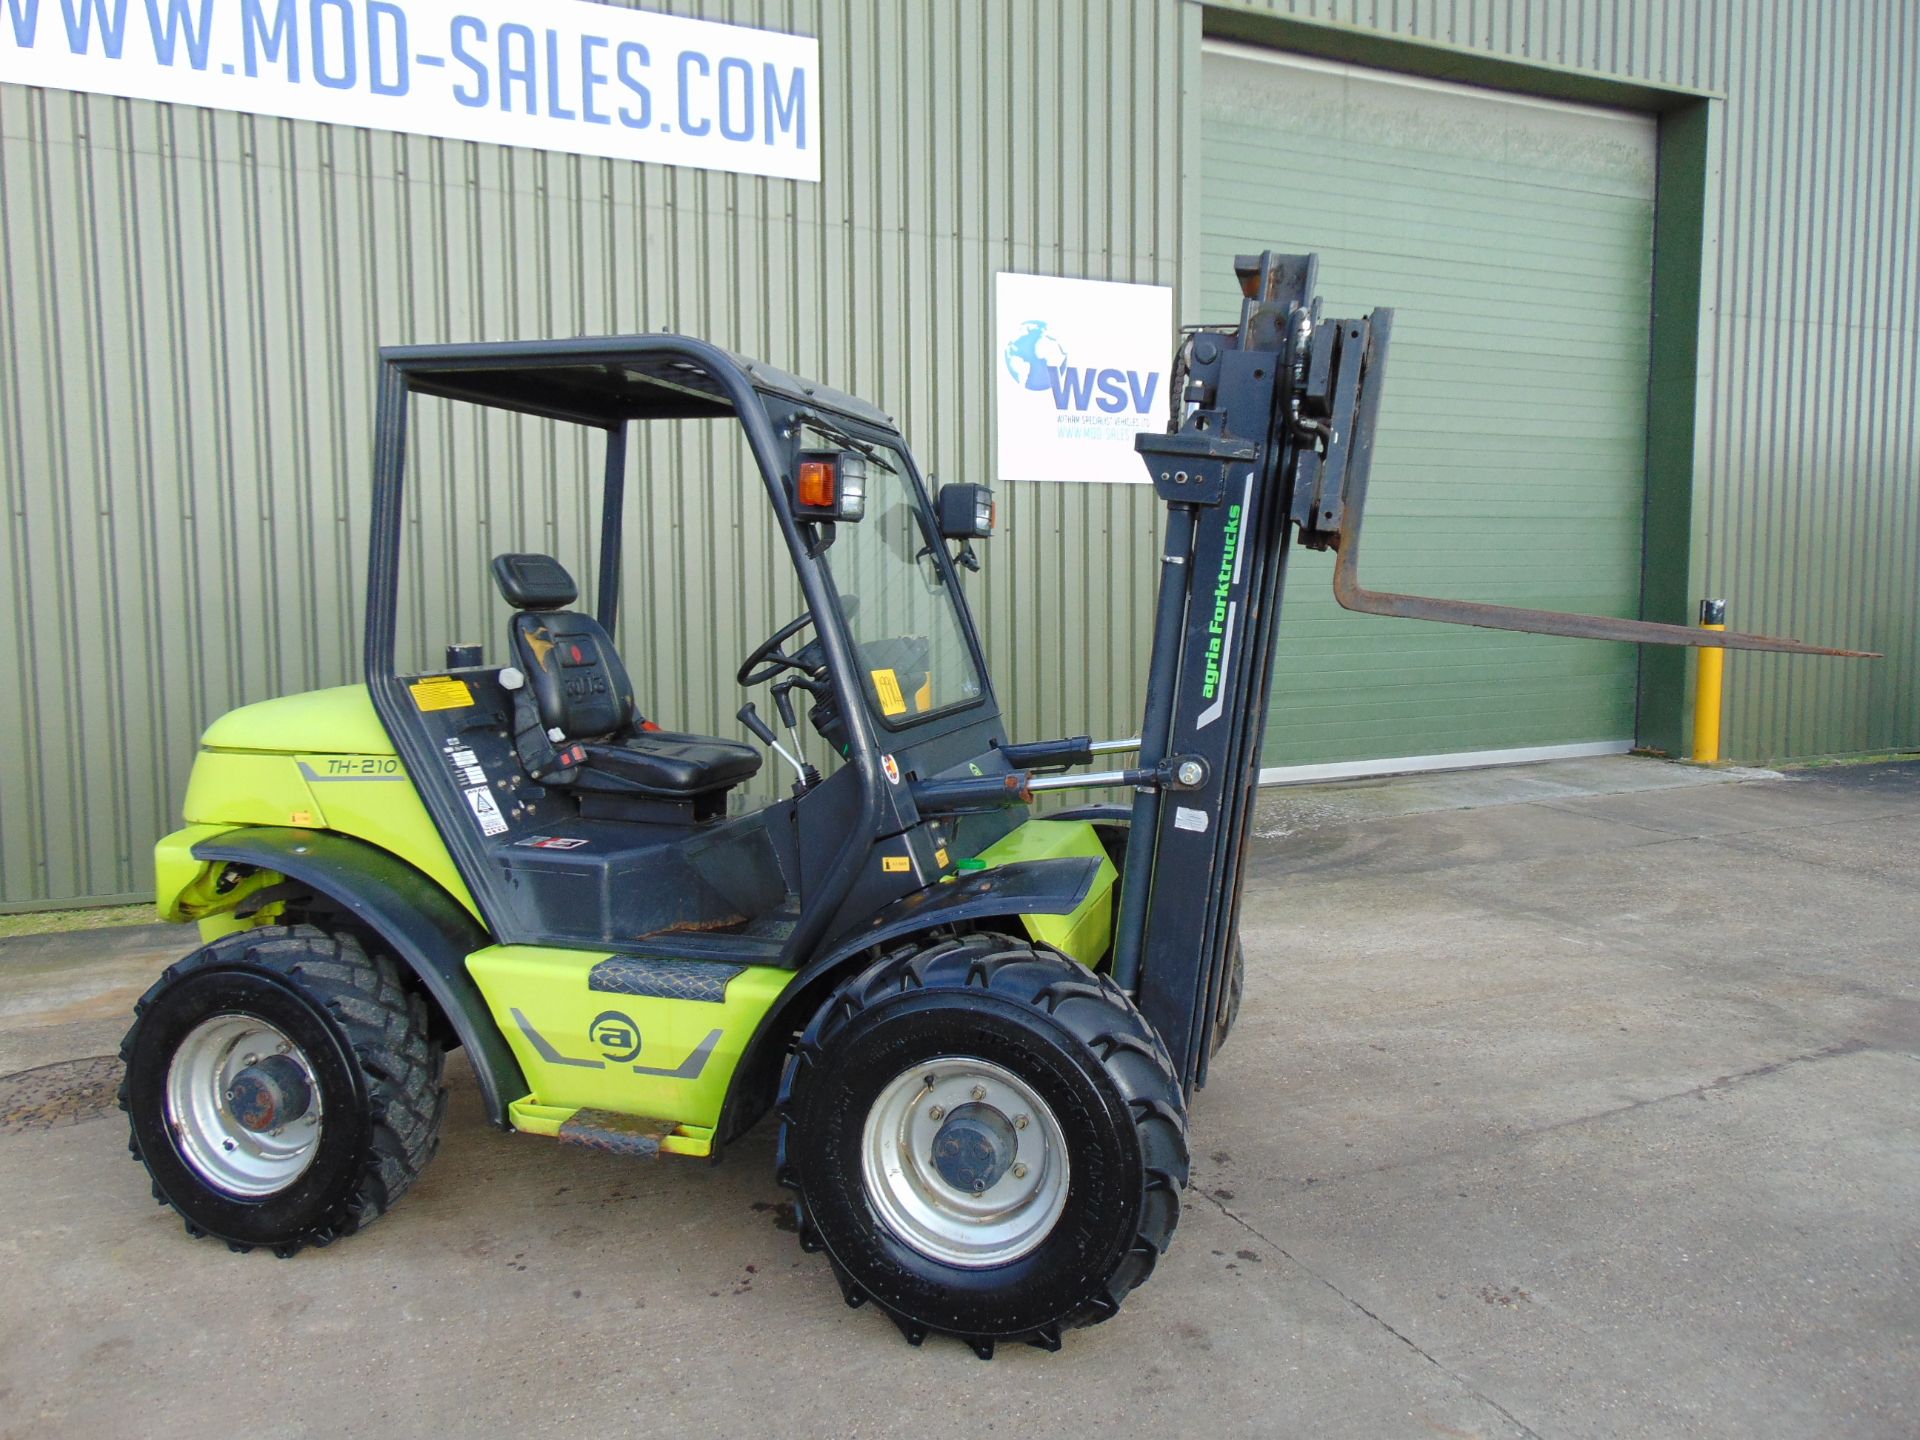 2011 Agrimac Agria TH210 4x4 Rough Terrain Diesel Forklift ONLY 1,918 HOURS!!! - Image 13 of 30